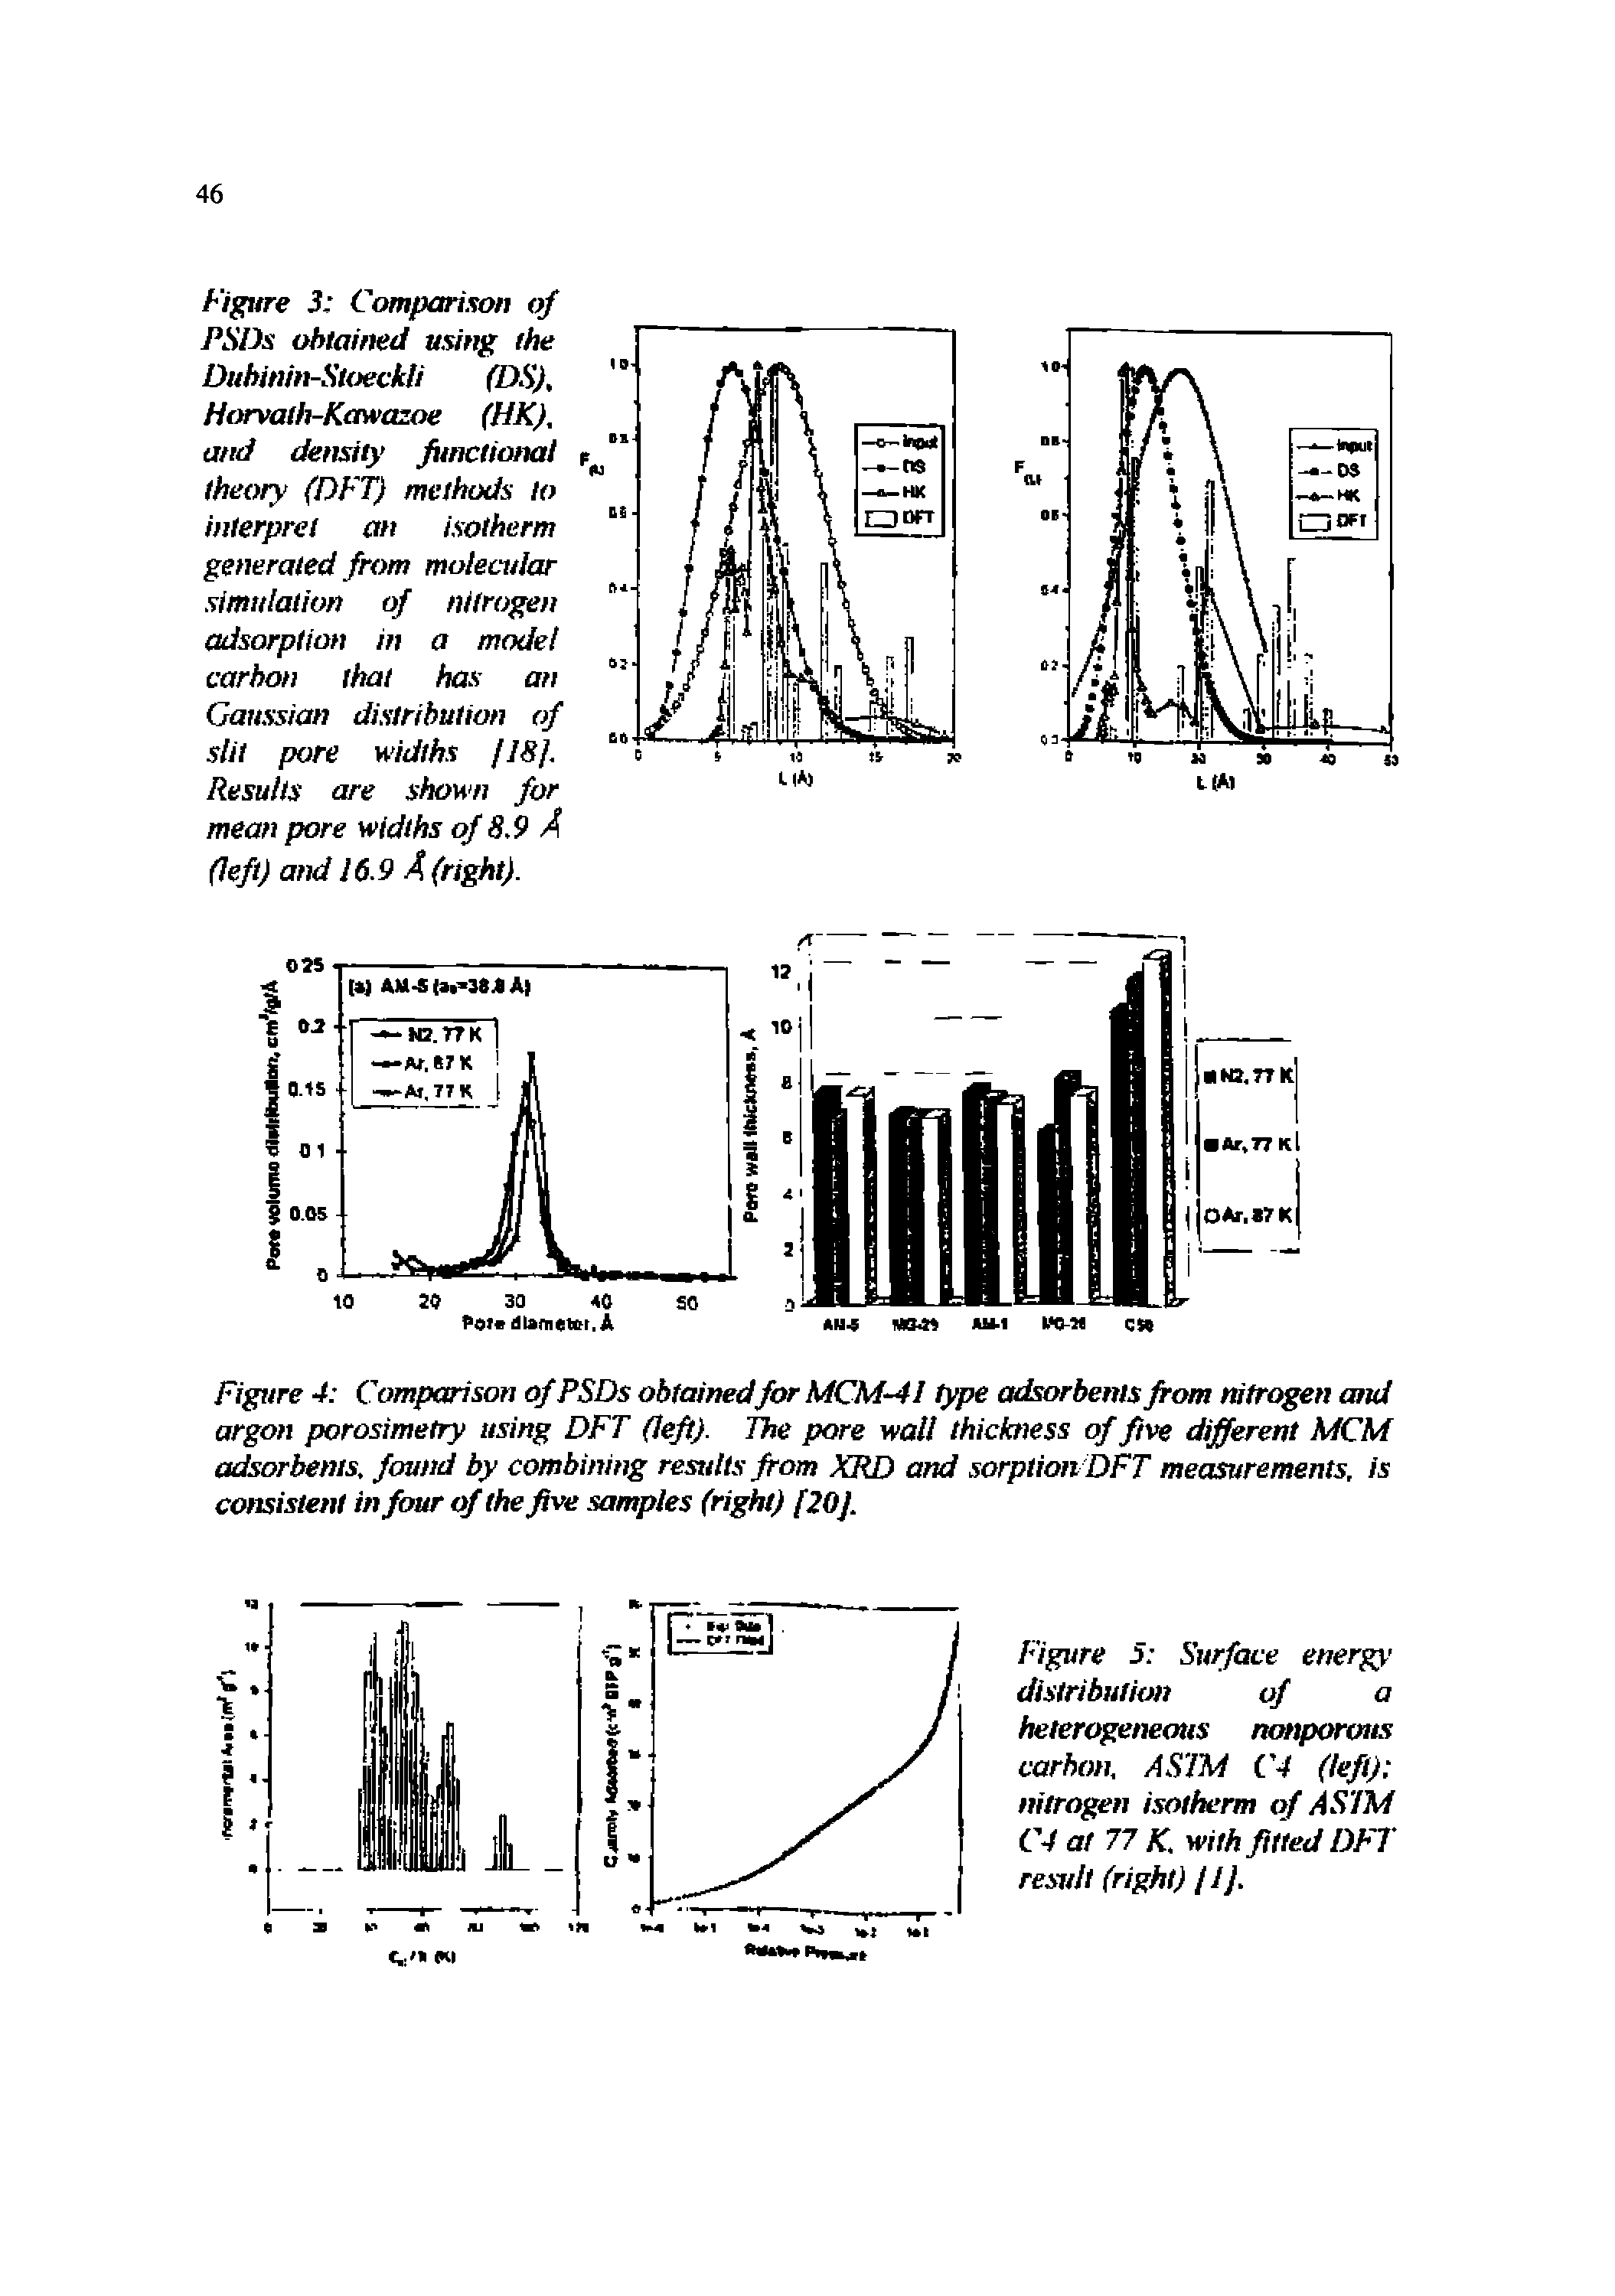 Figure 3 Comparison of PSDs obtained using the Dubinin-Stoeckli (DS), Horvalh-Kawazoe (HK), and density fitnctional theory (DFT) methods to interpret an isotherm generated from molecular simulation of nitrogen adsorption in a model carbon that has an Gaussian distribution of slit pore widths (18]. Results are shown for mean pore widths of 8.9 A (left) and 16.9 A (right).